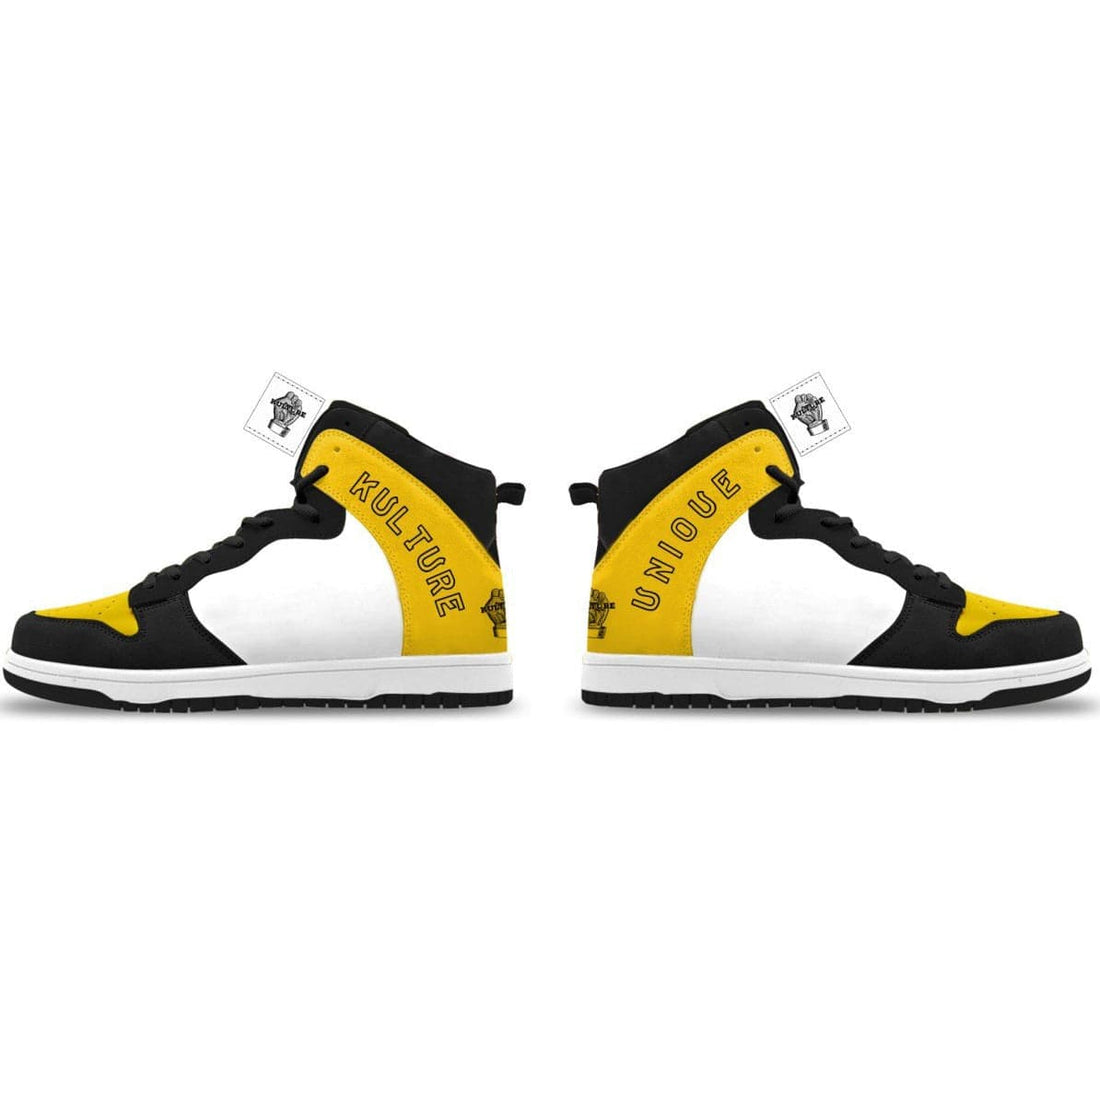 unique kulture  the kultures yellow black and white mid top sneakers urban jordan style bumble bee sneakers bumble bee transformer sneaker custom unique smooth comfy shoes